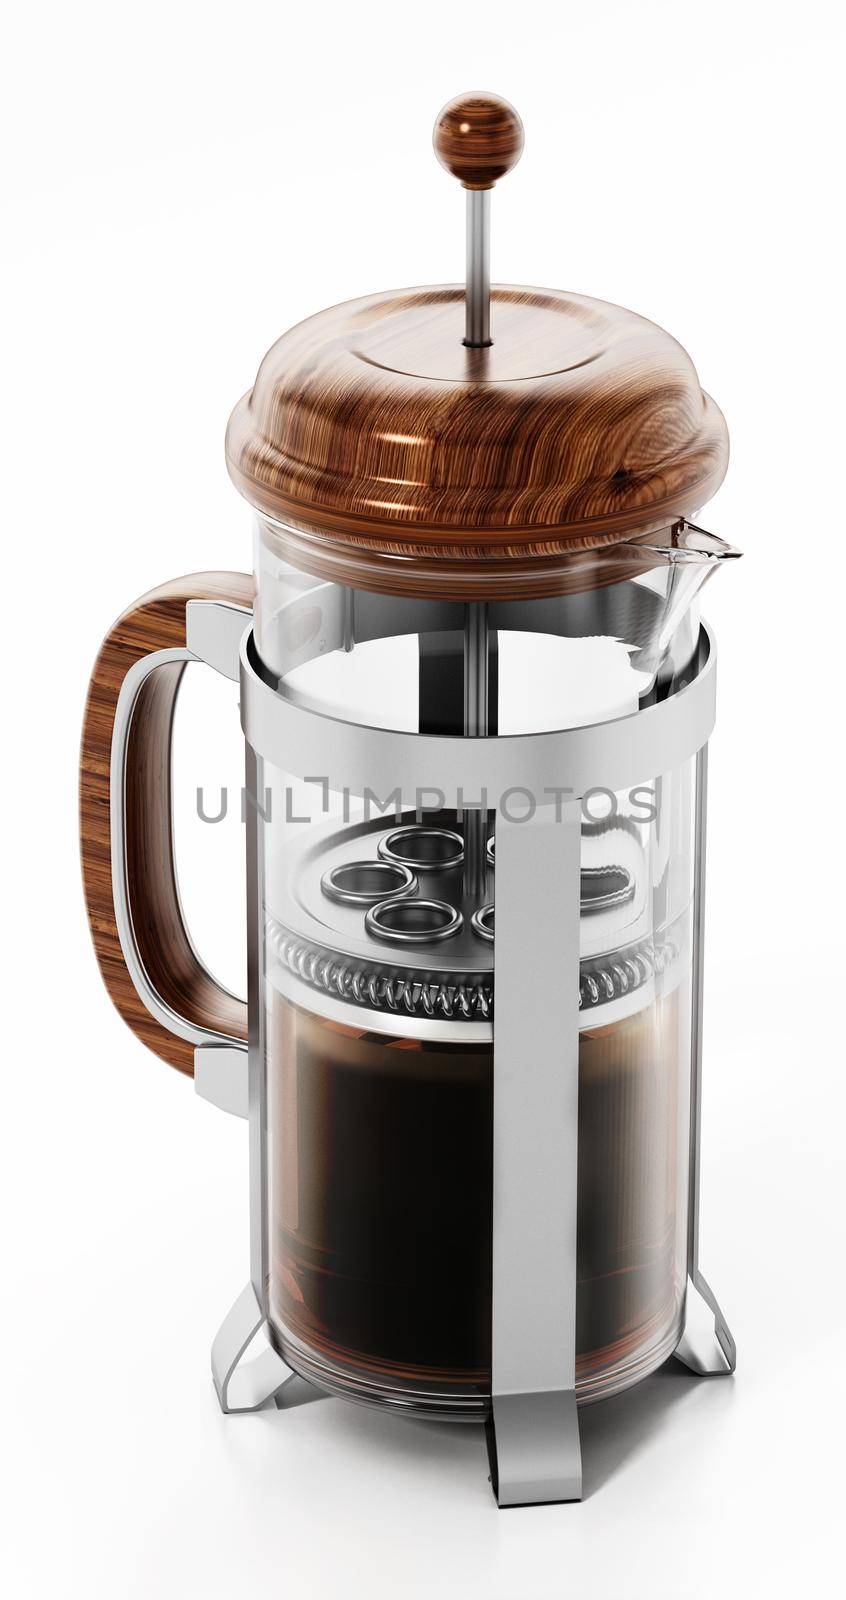 Fench press with coffee isolated on white background. 3D illustration.